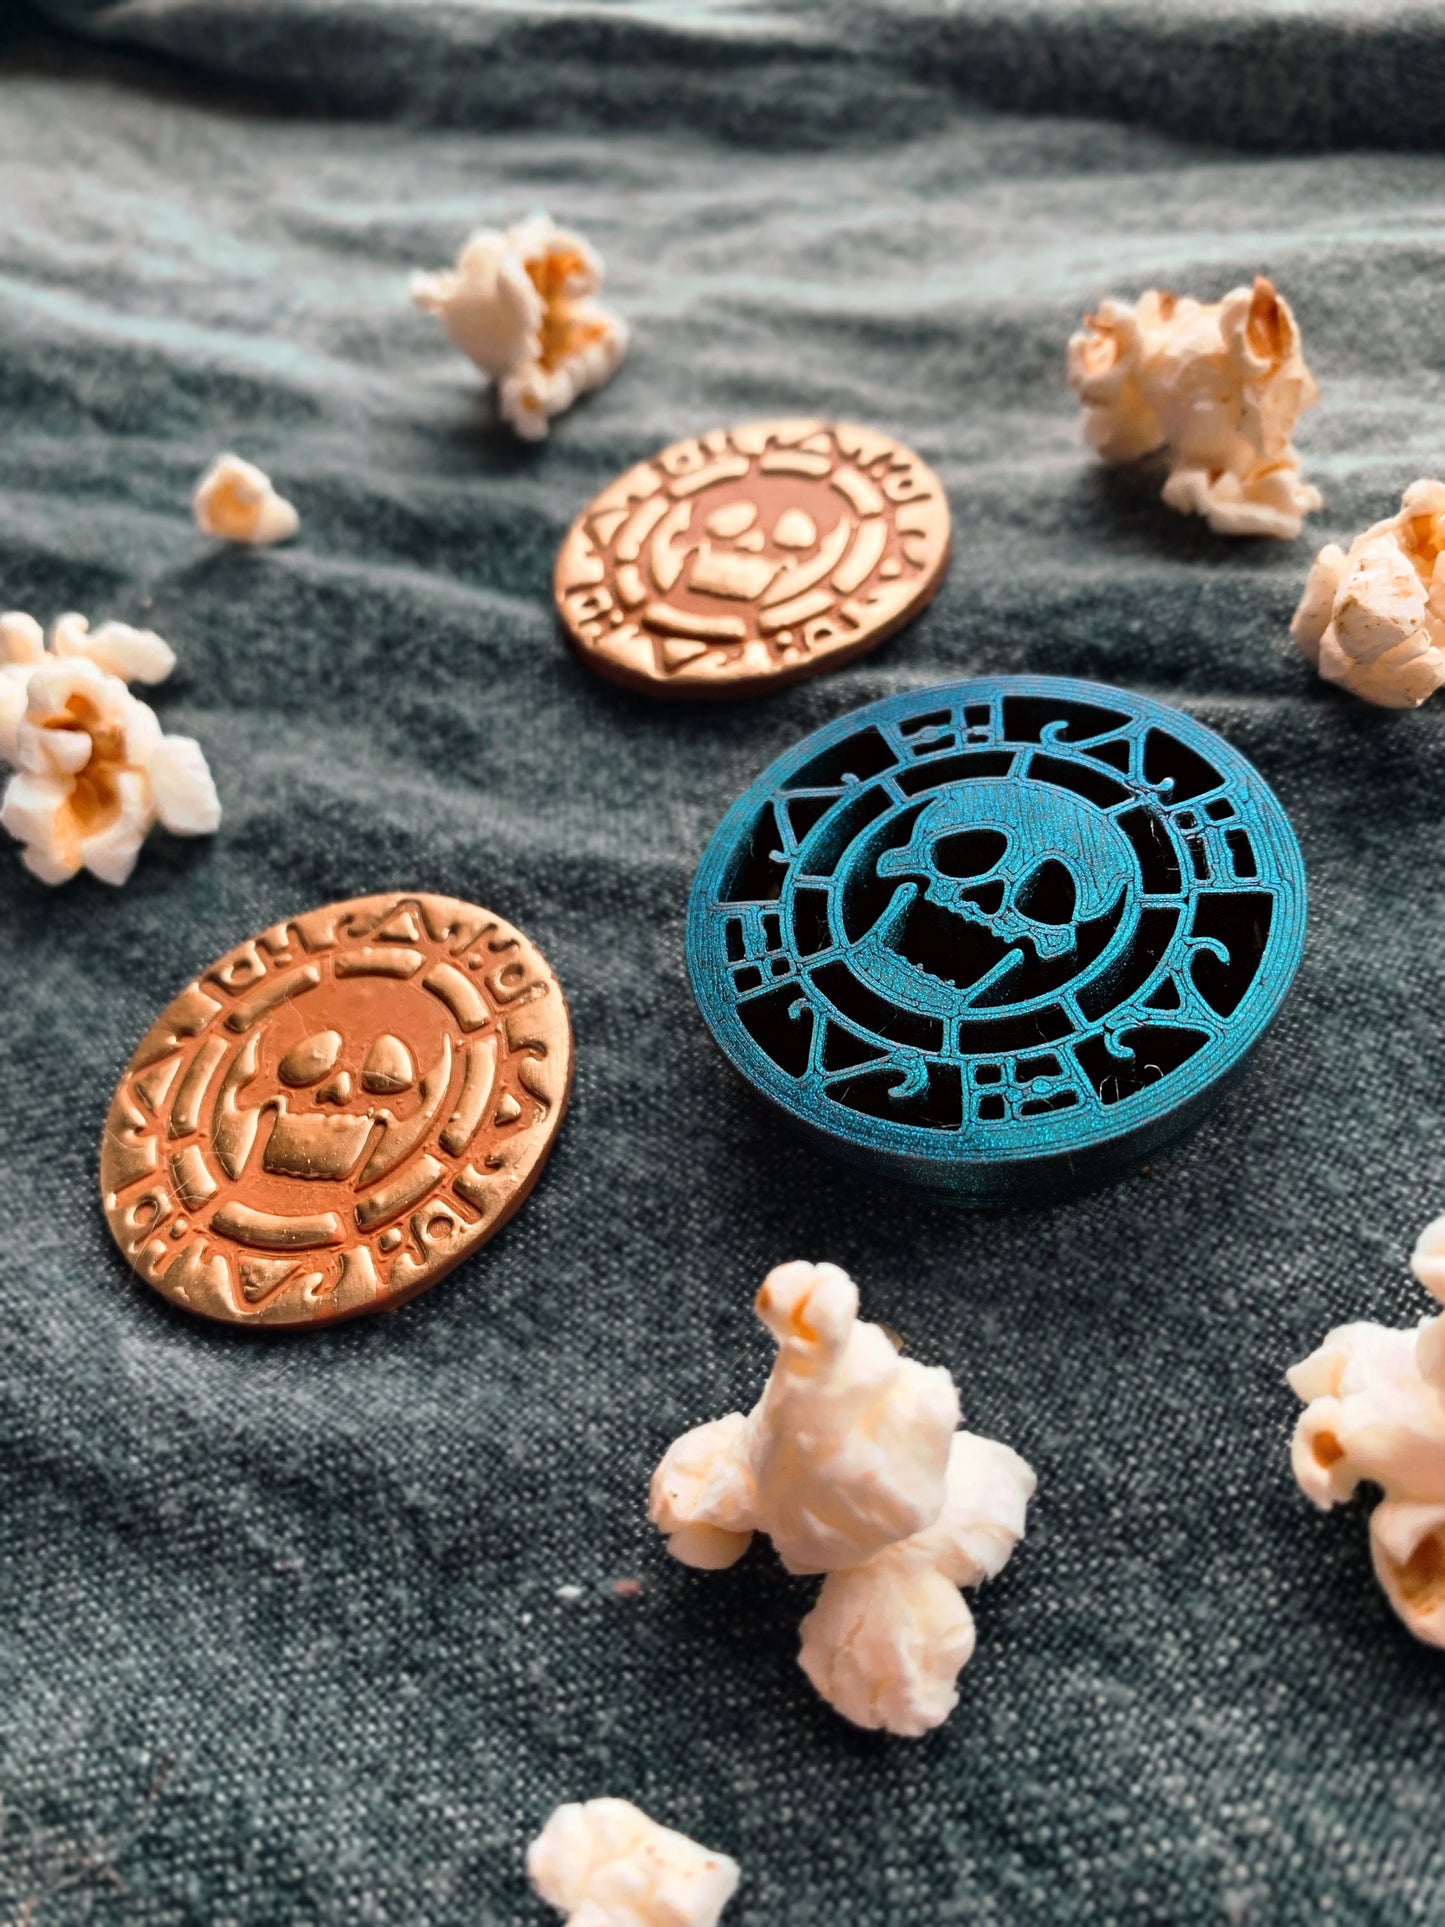 Pirate Skull Coin - Embossed Sharp Clay Cutter